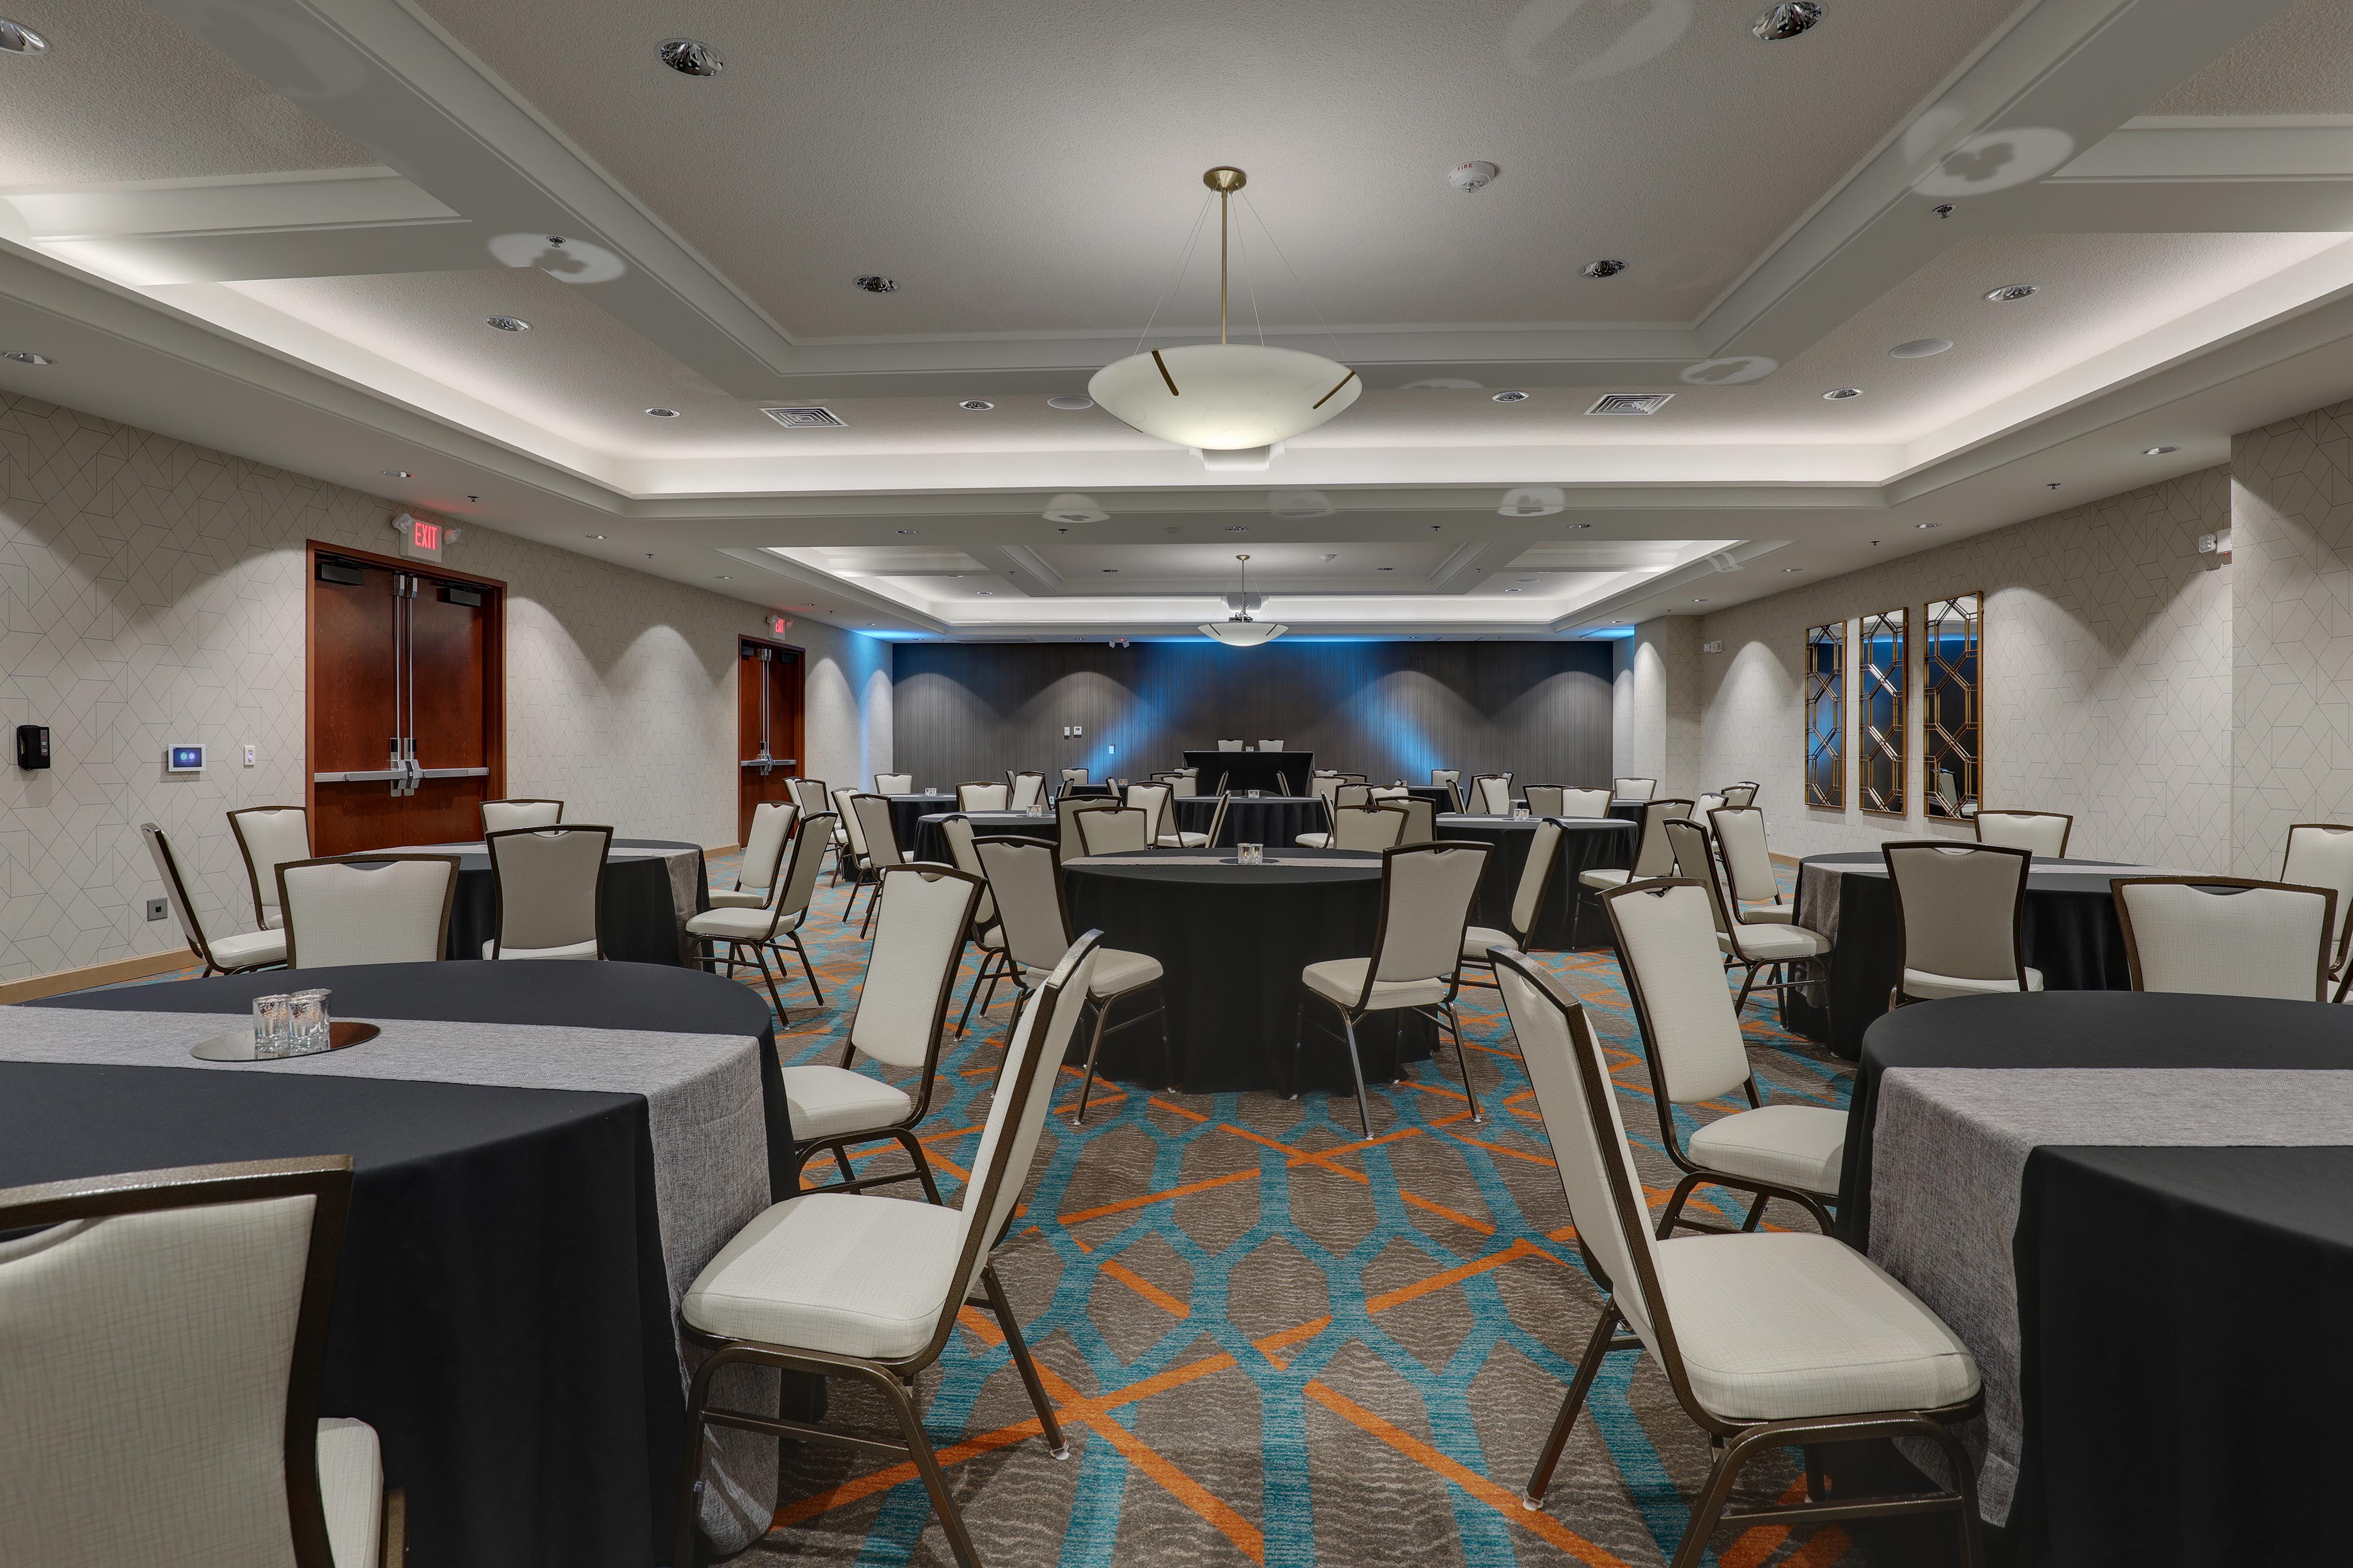 Large meeting space, set up with round tables throughout